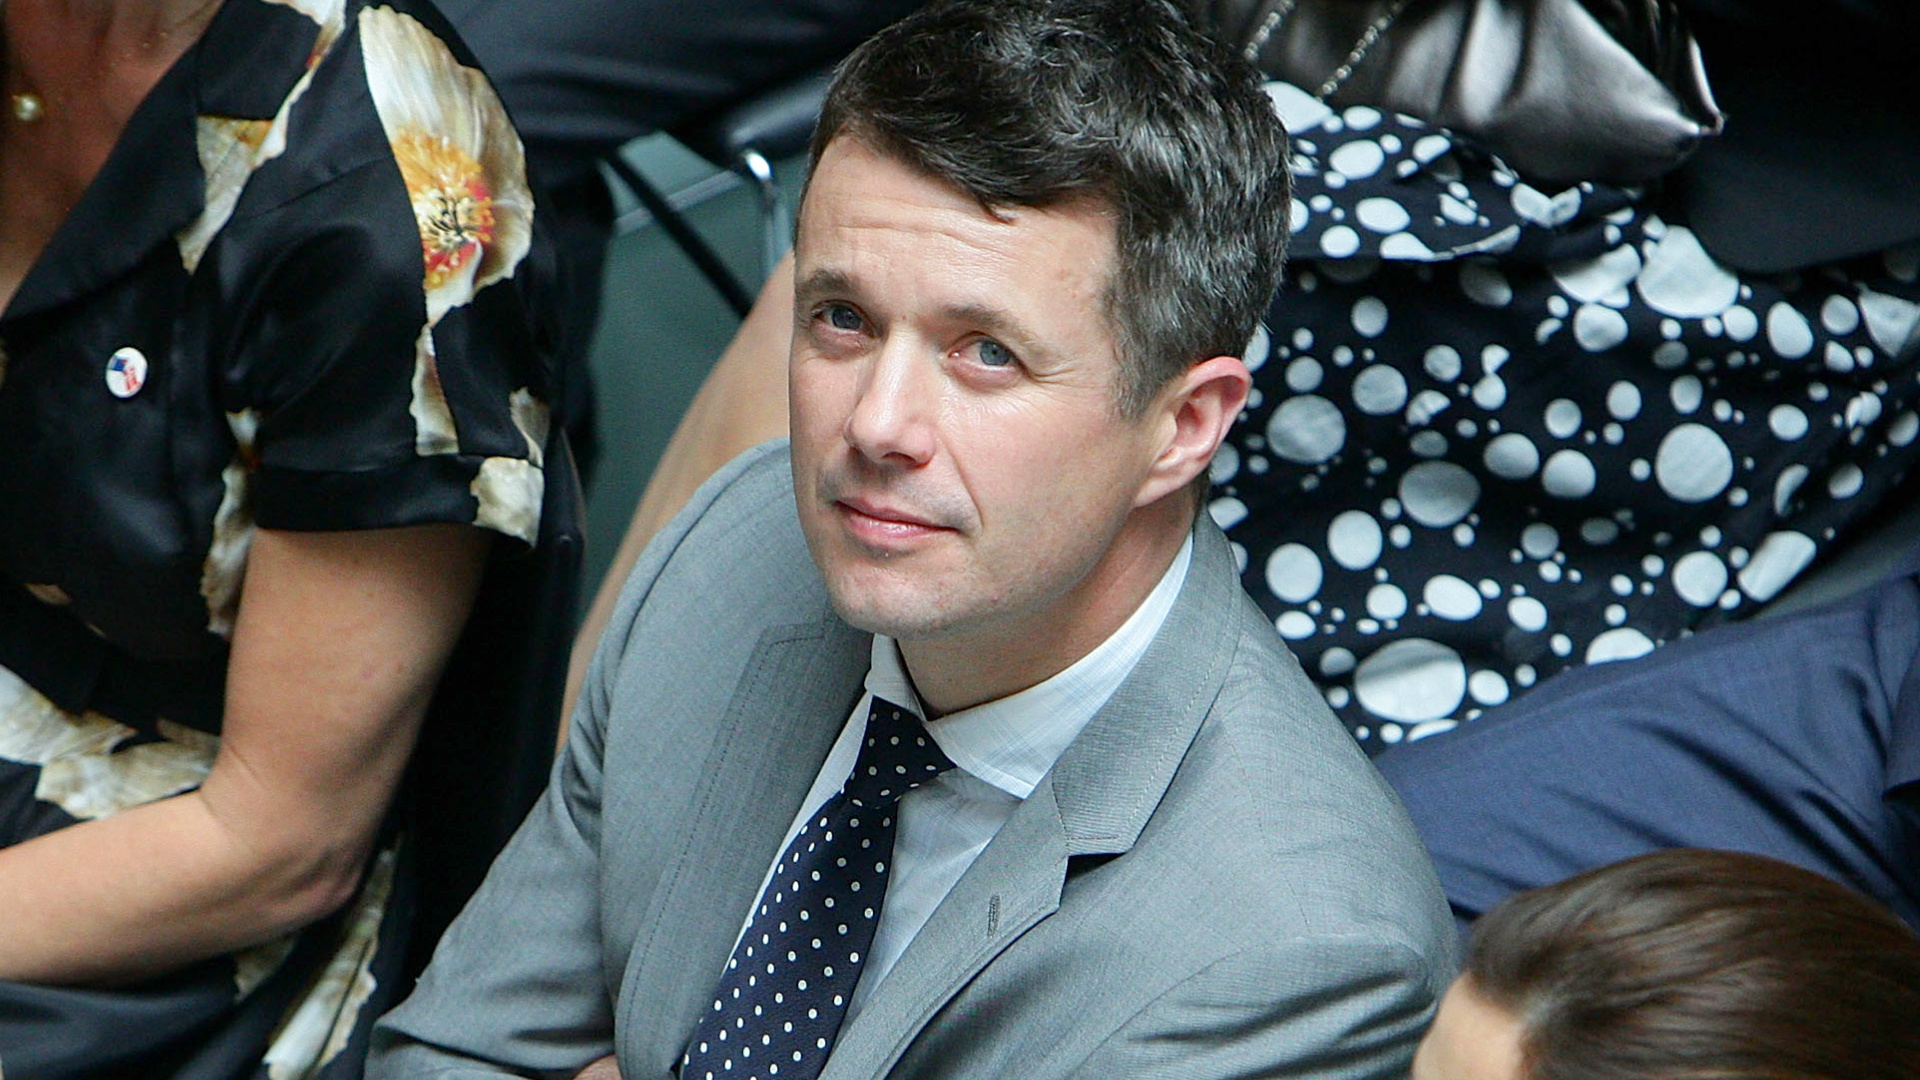 Parliament even questioned whether Frederik could reign